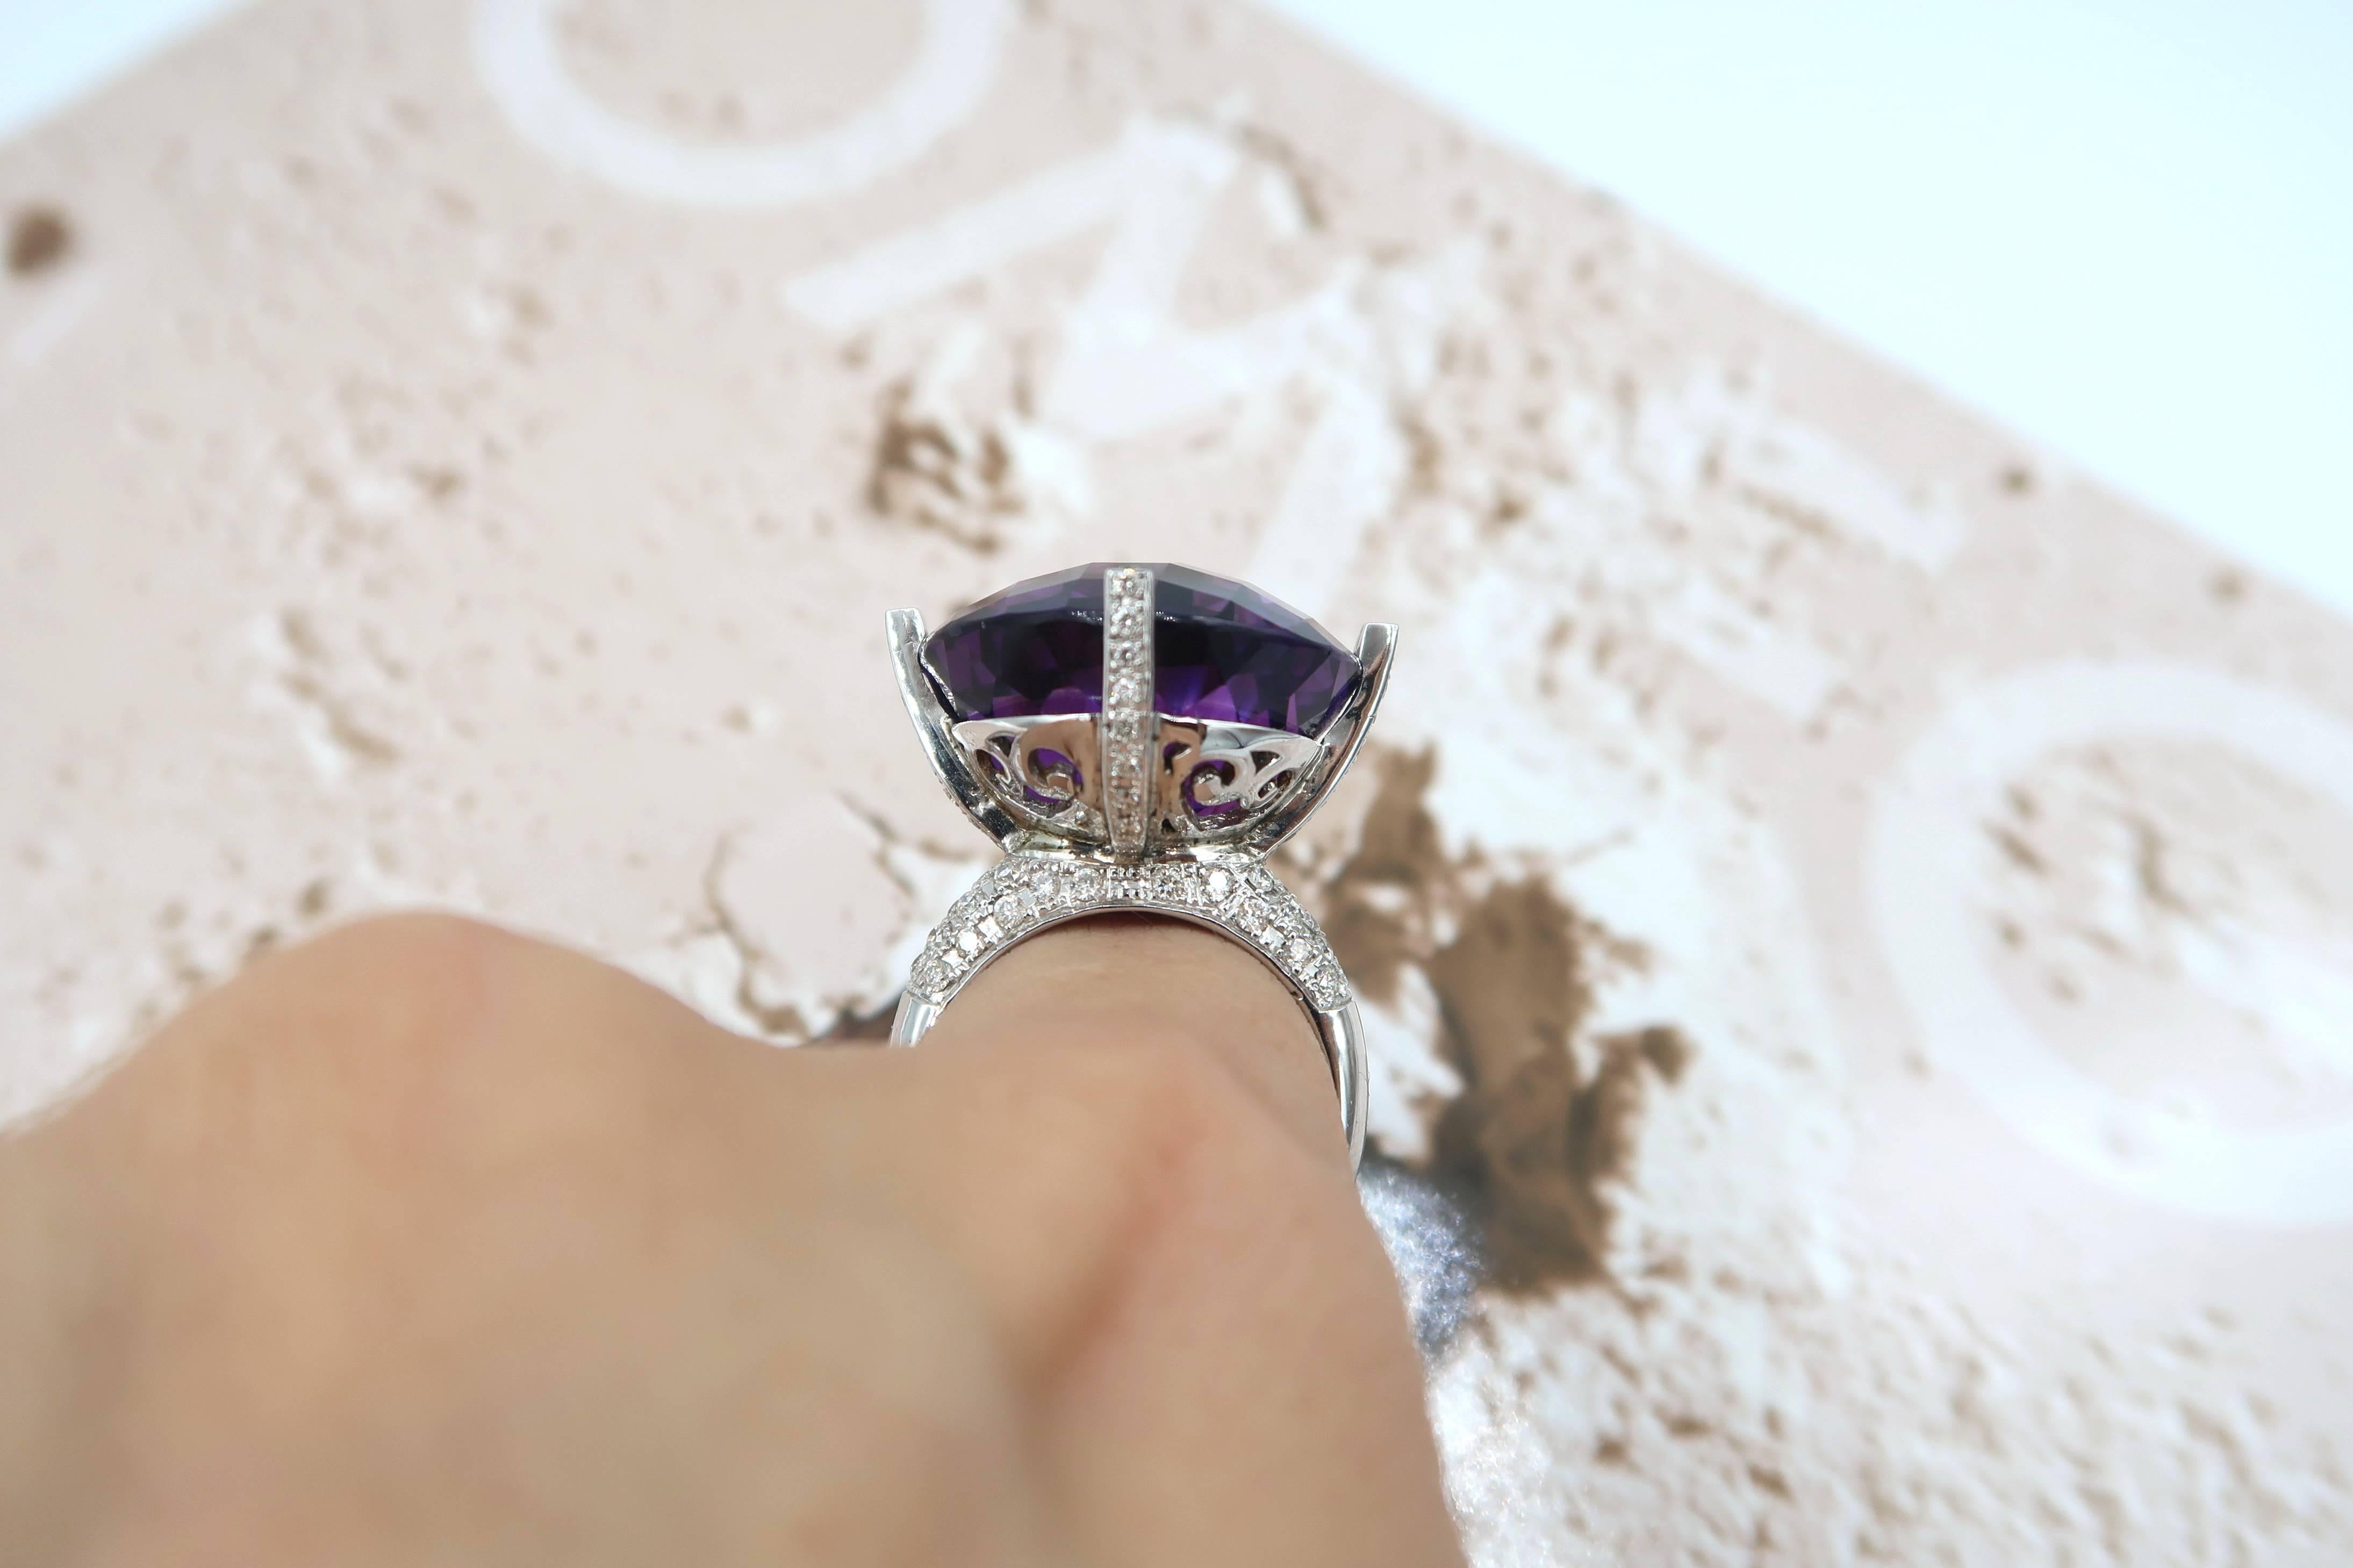 Large 26.84 Carat Intense Purple Amethyst Cocktail Ring with Diamond in 18K White Gold

A one-off complimentary resizing service is available for this ring. Please kindly contact us should you wish to have the ring resized.

Size : 53 / M / 6